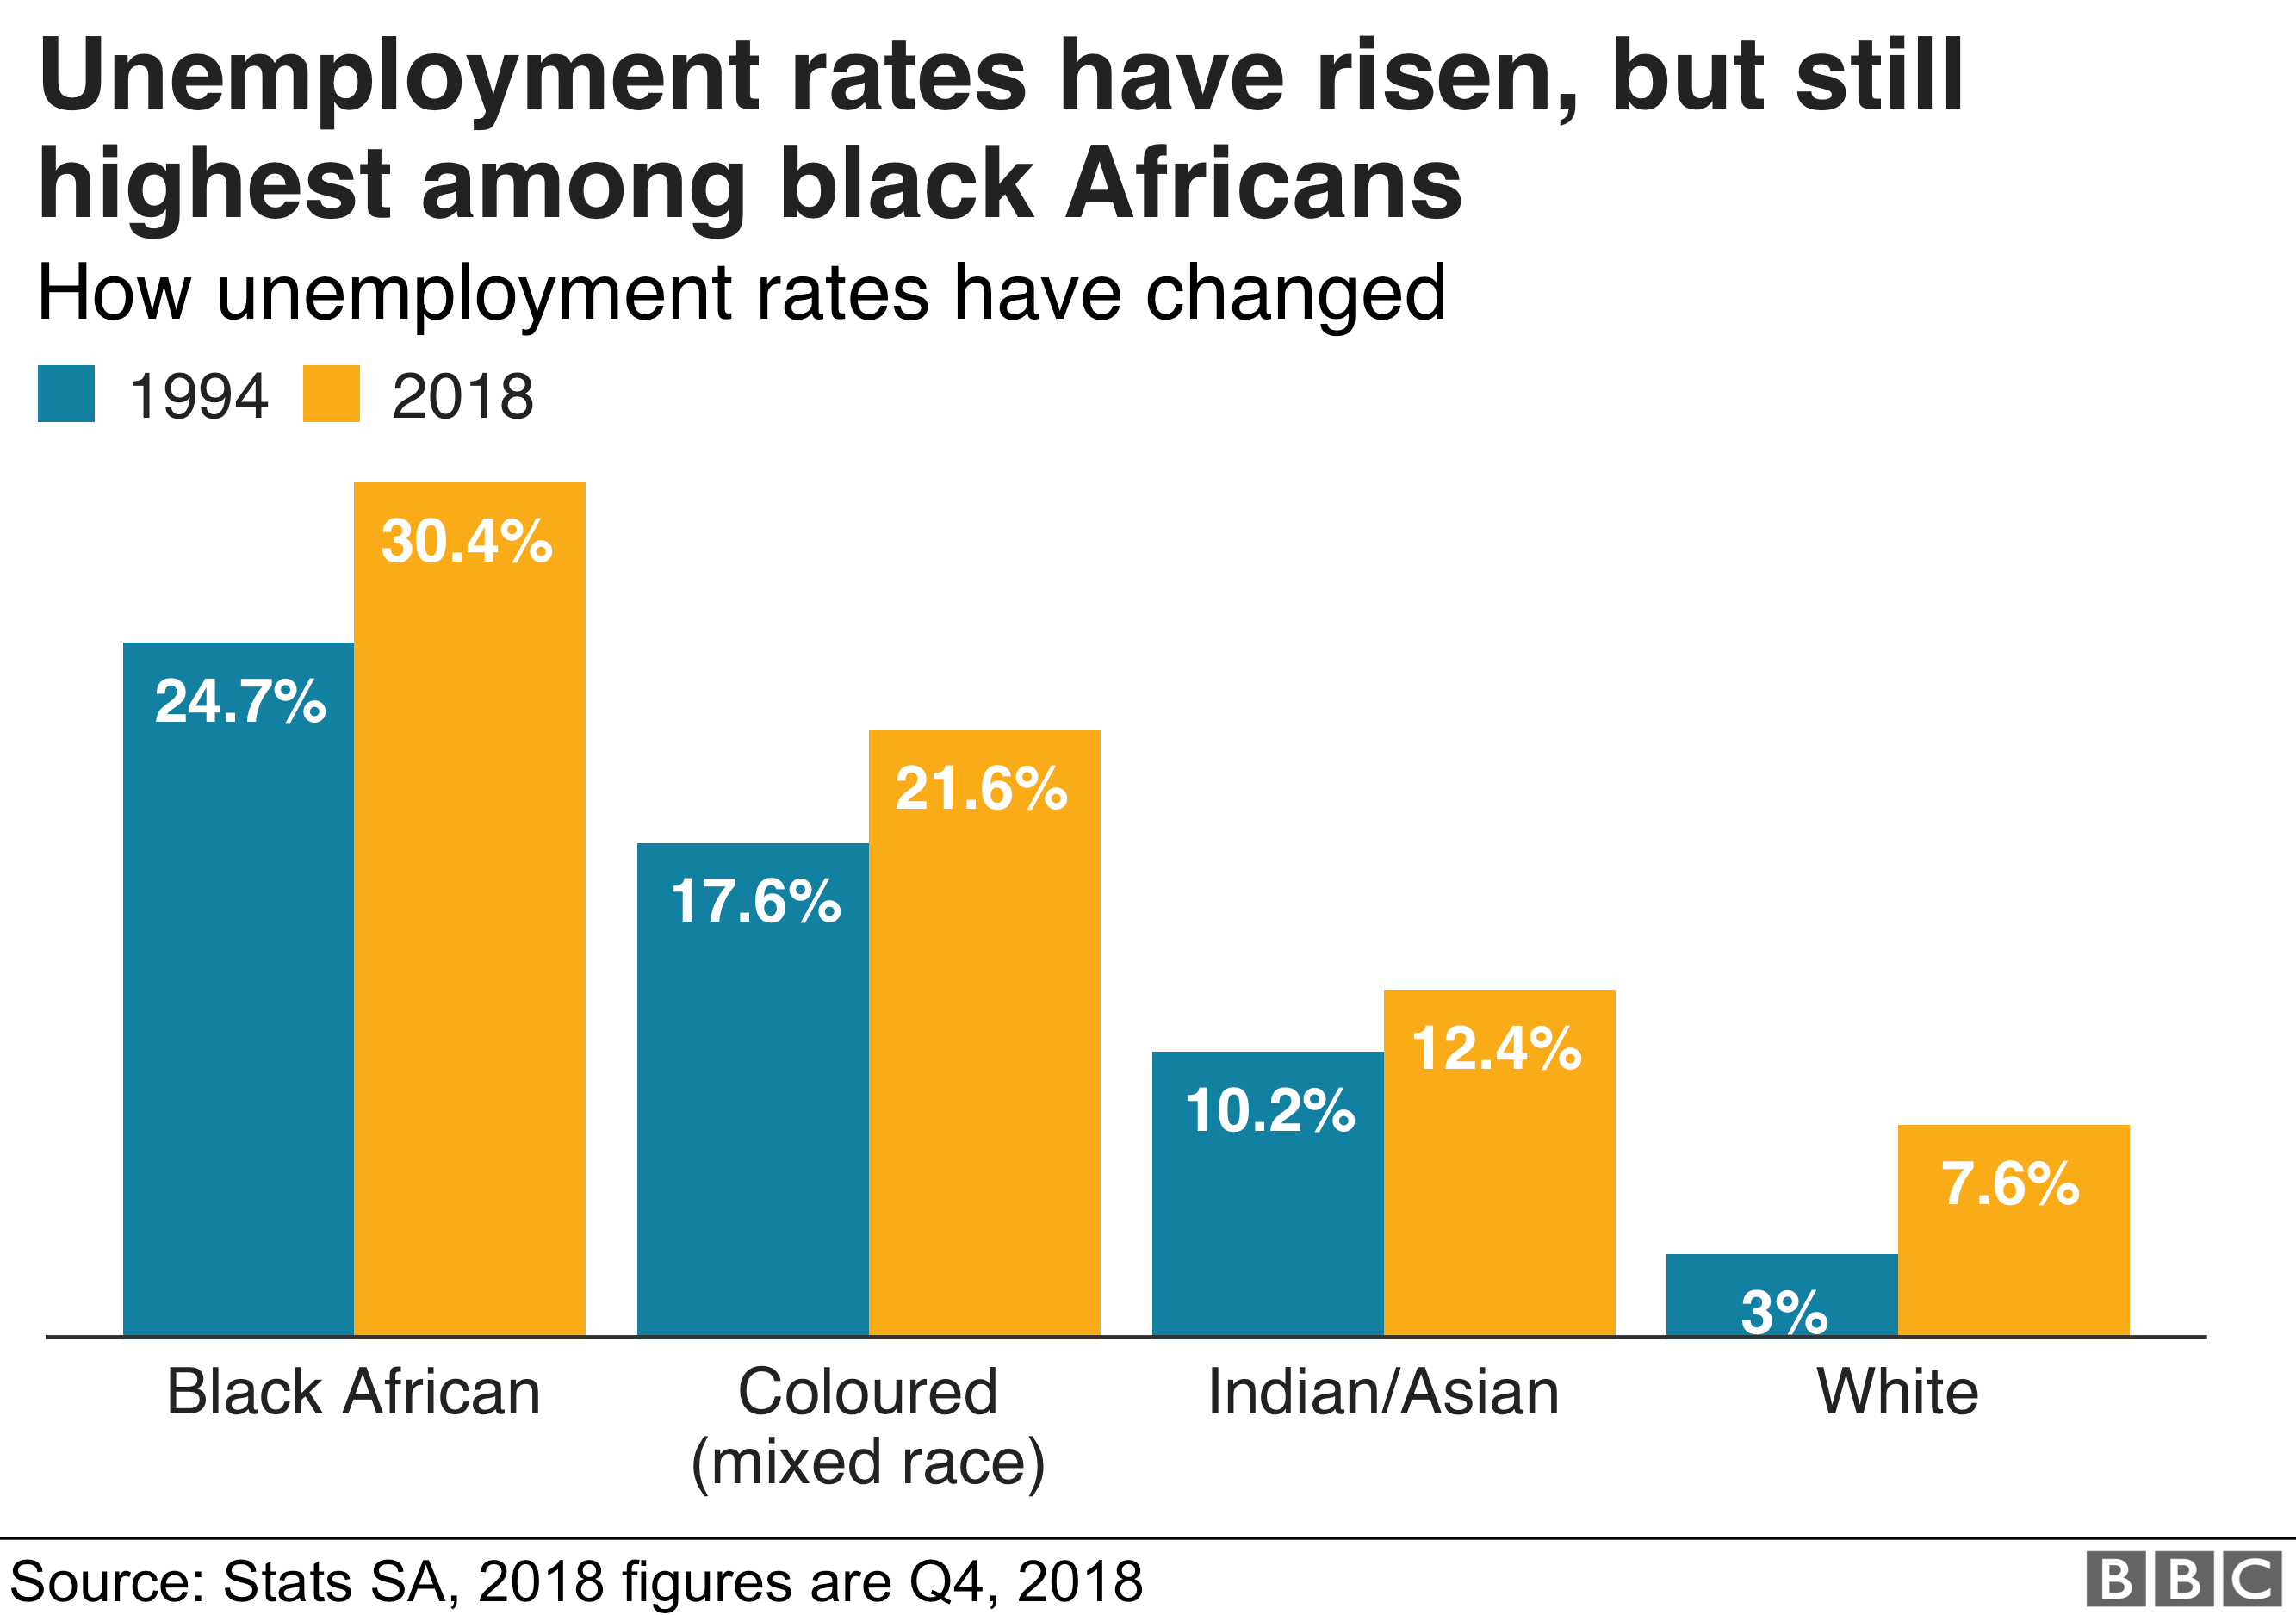 Chart shows black Africans are still hardest hit by unemployment